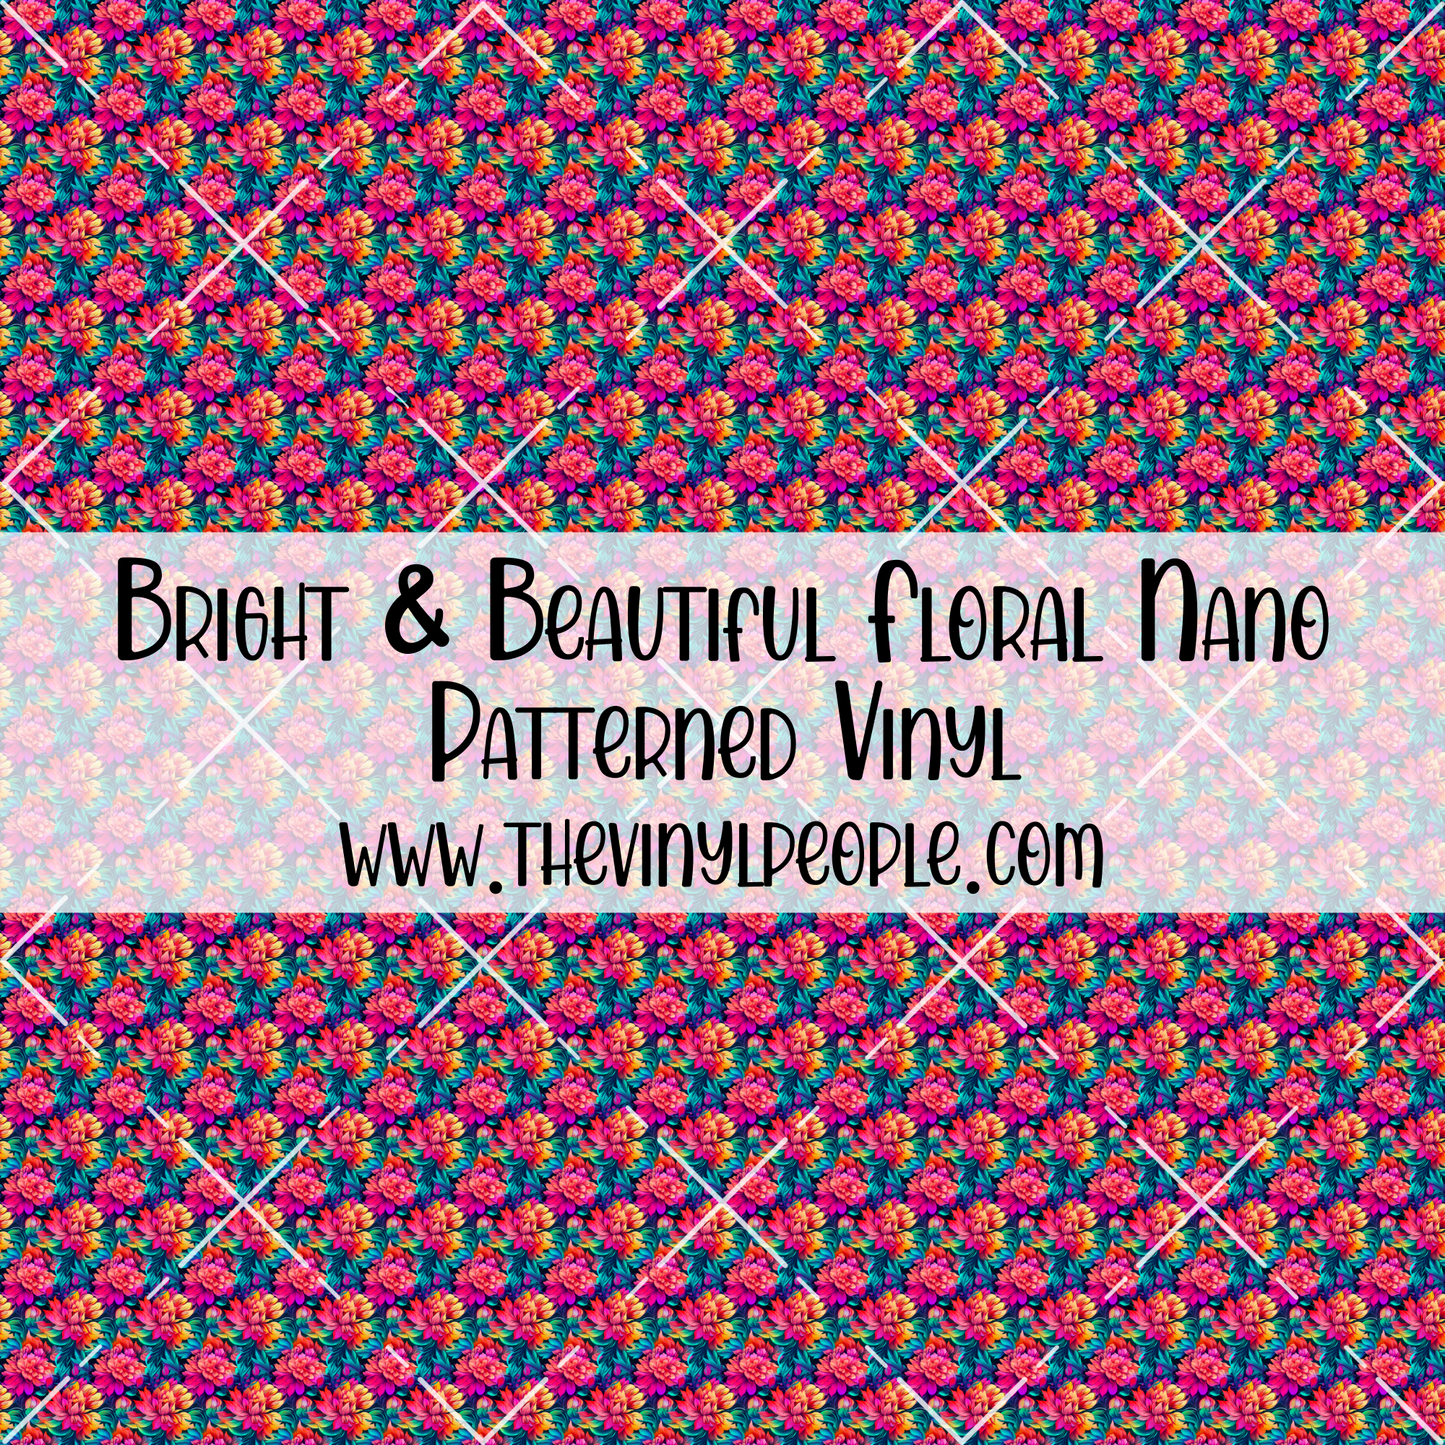 Bright & Beautiful Floral Patterned Vinyl